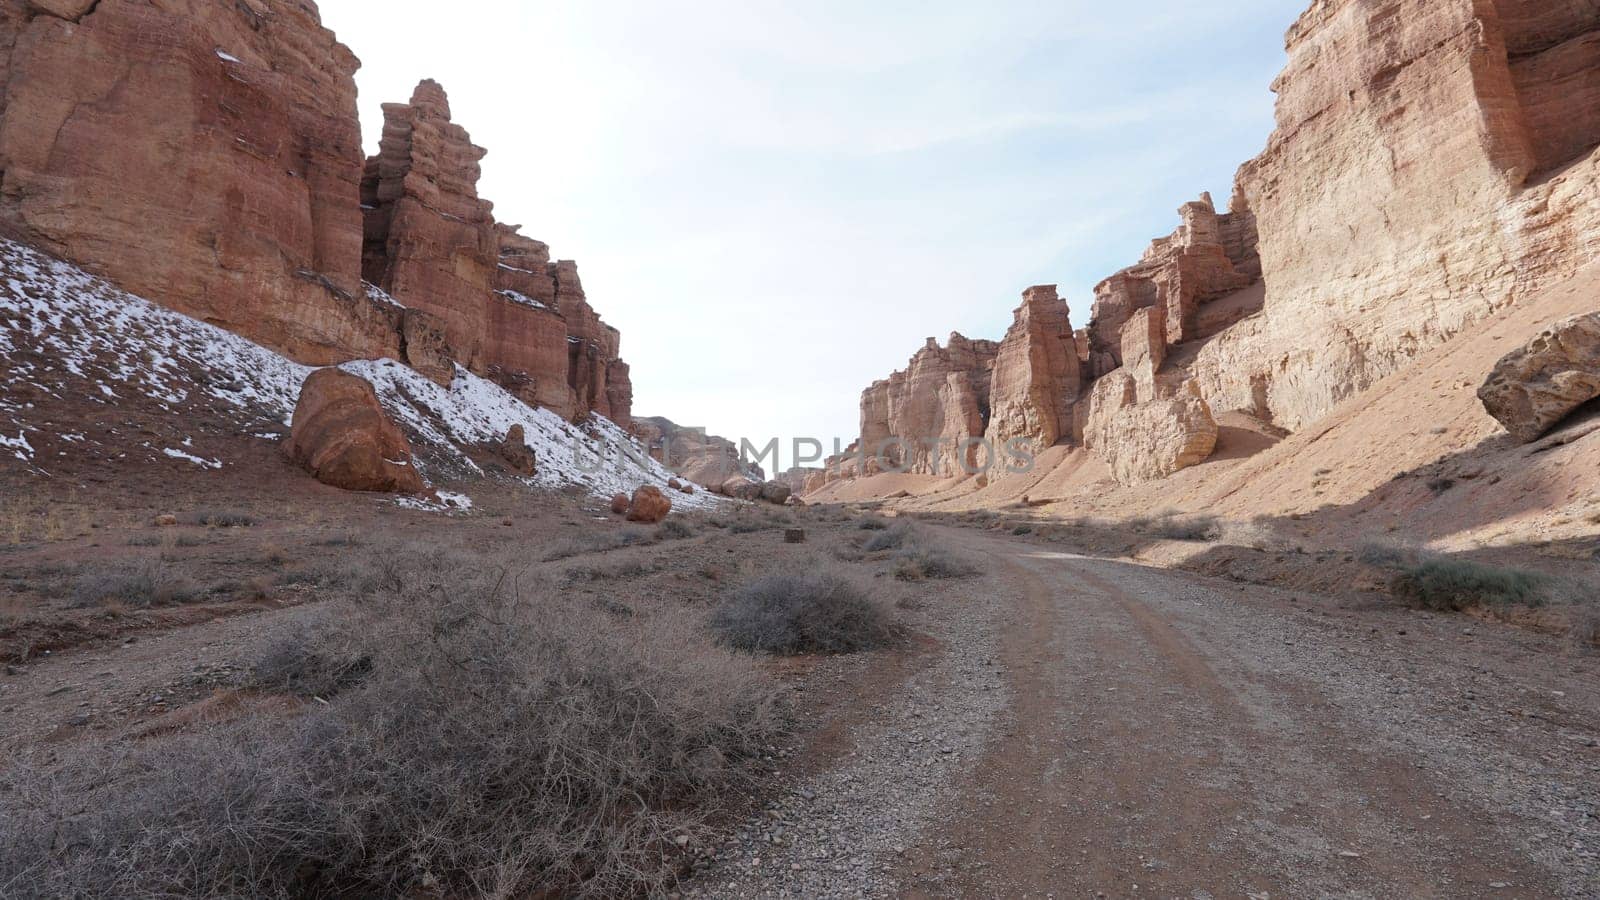 Grand Canyon Charyn. Orange cliffs and rocks. In places there are dry bushes and there is snow. The sun is shining brightly. White clouds. Faults and cracks in the canyon. The place looks like Mars